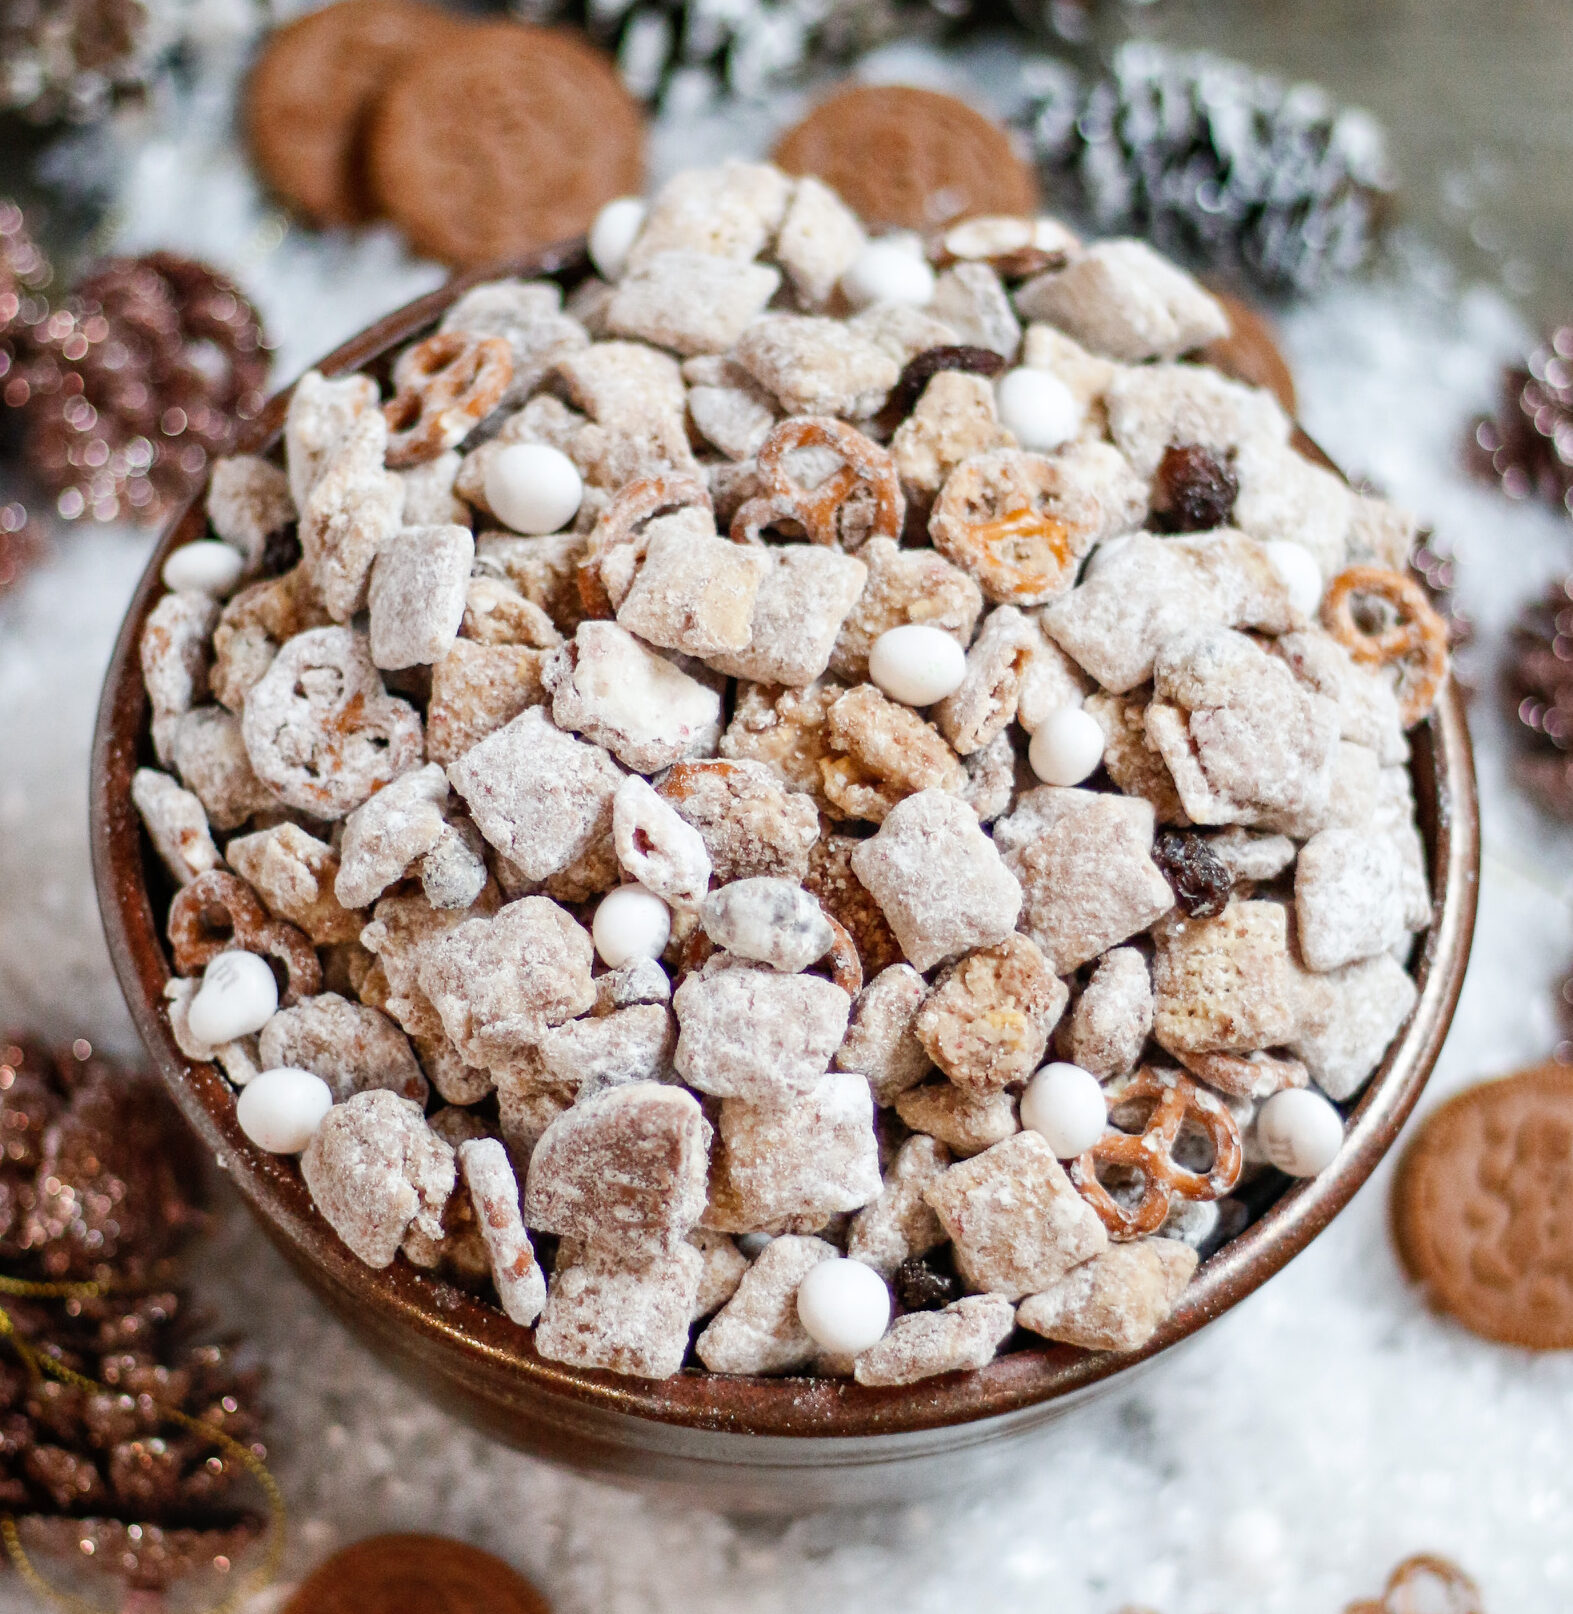 gingerbread puppy chow, puppy chow, christmas puppy chow, cookie butter puppy chow, oreo puppy chow, gingerbread oreo puppy chow